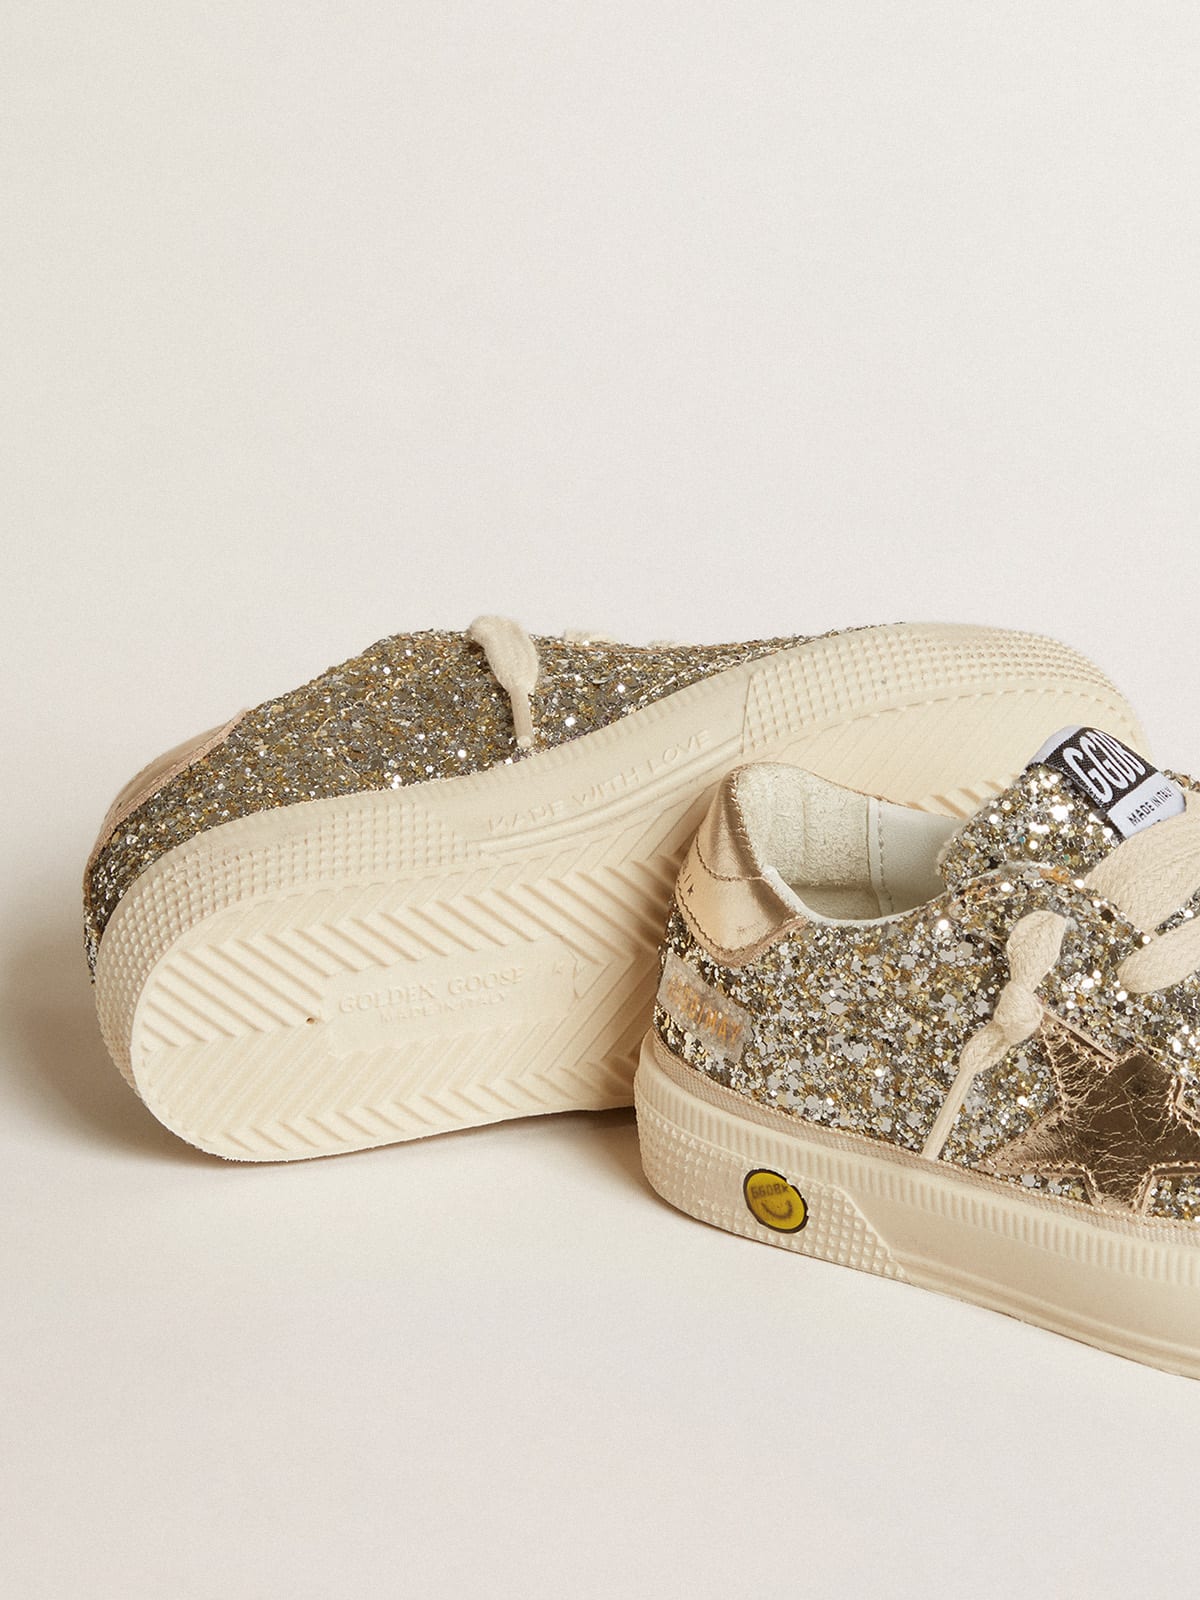 Golden Goose - May Young in platinum glitter with metallic leather star and heel tab in 